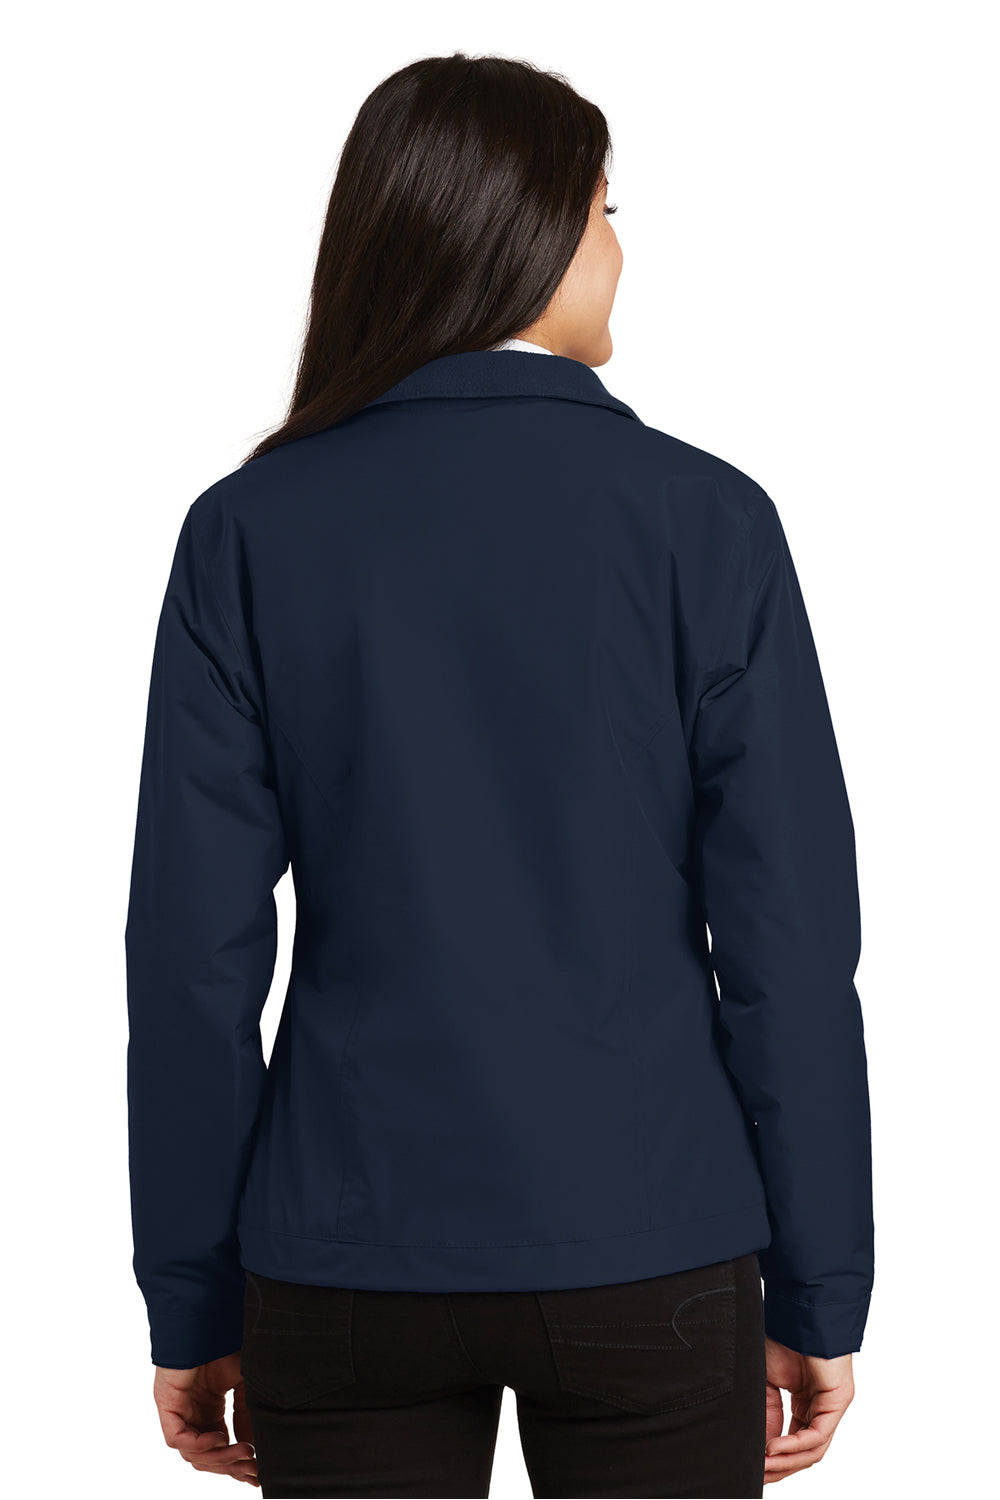 Port Authority L354 Womens Challenger Wind & Water Resistant Full Zip Jacket Navy Blue Back